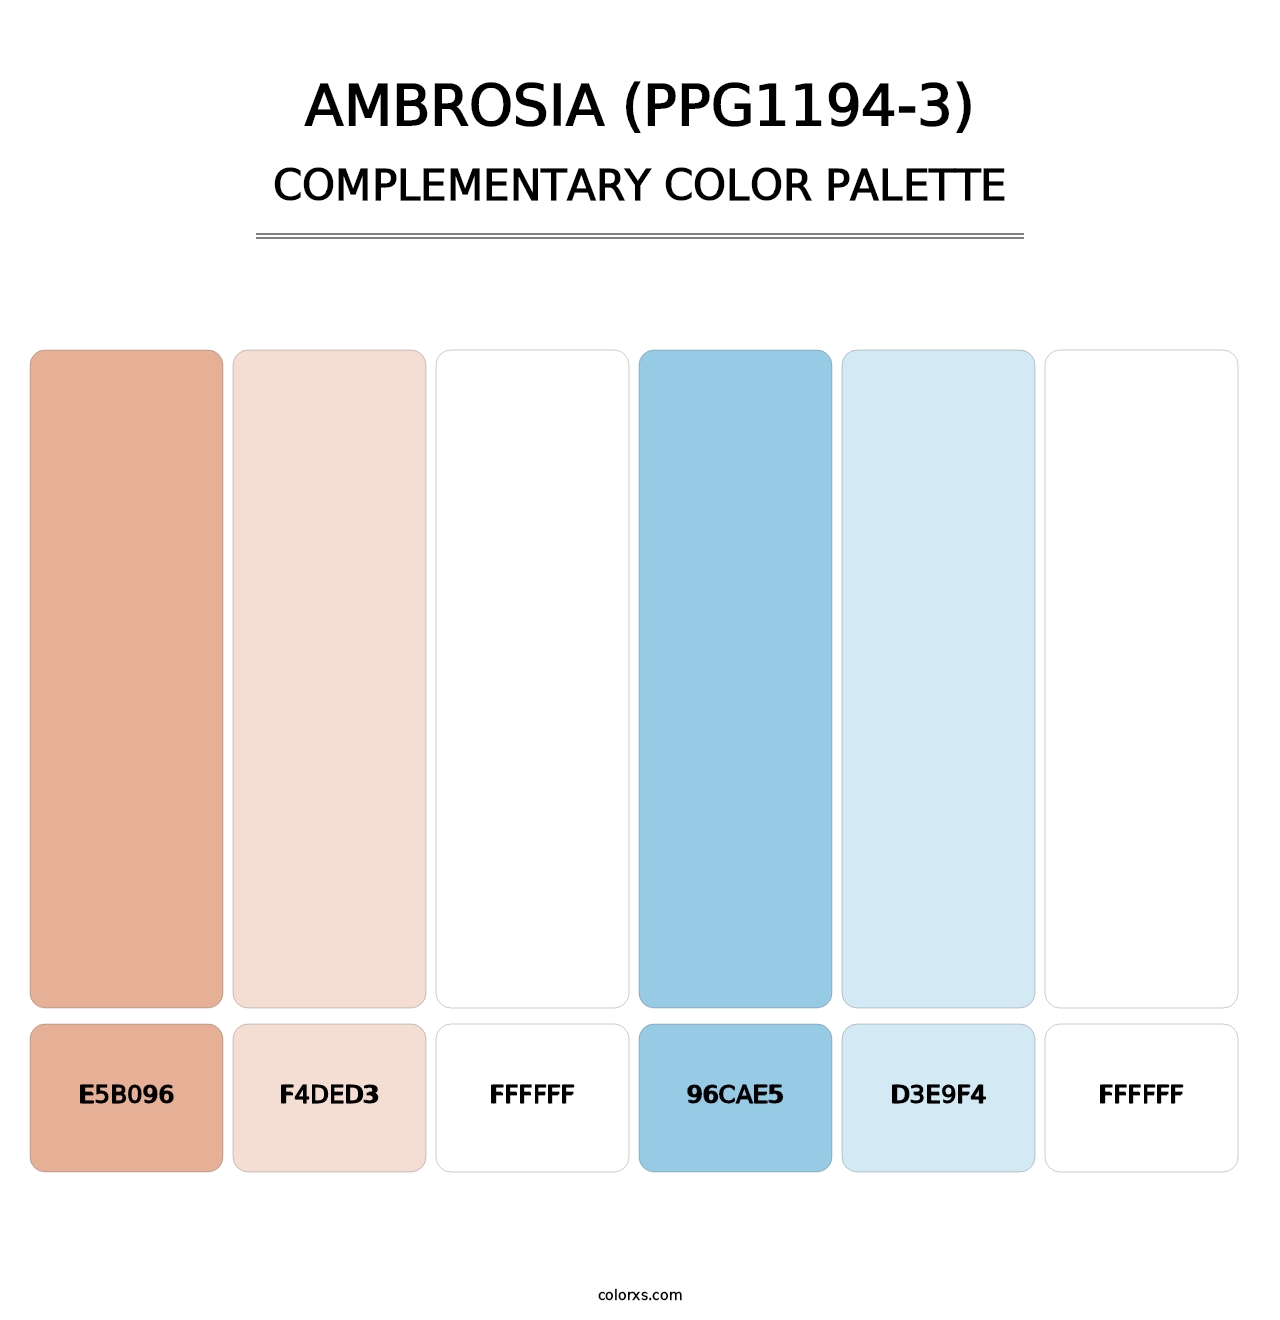 Ambrosia (PPG1194-3) - Complementary Color Palette